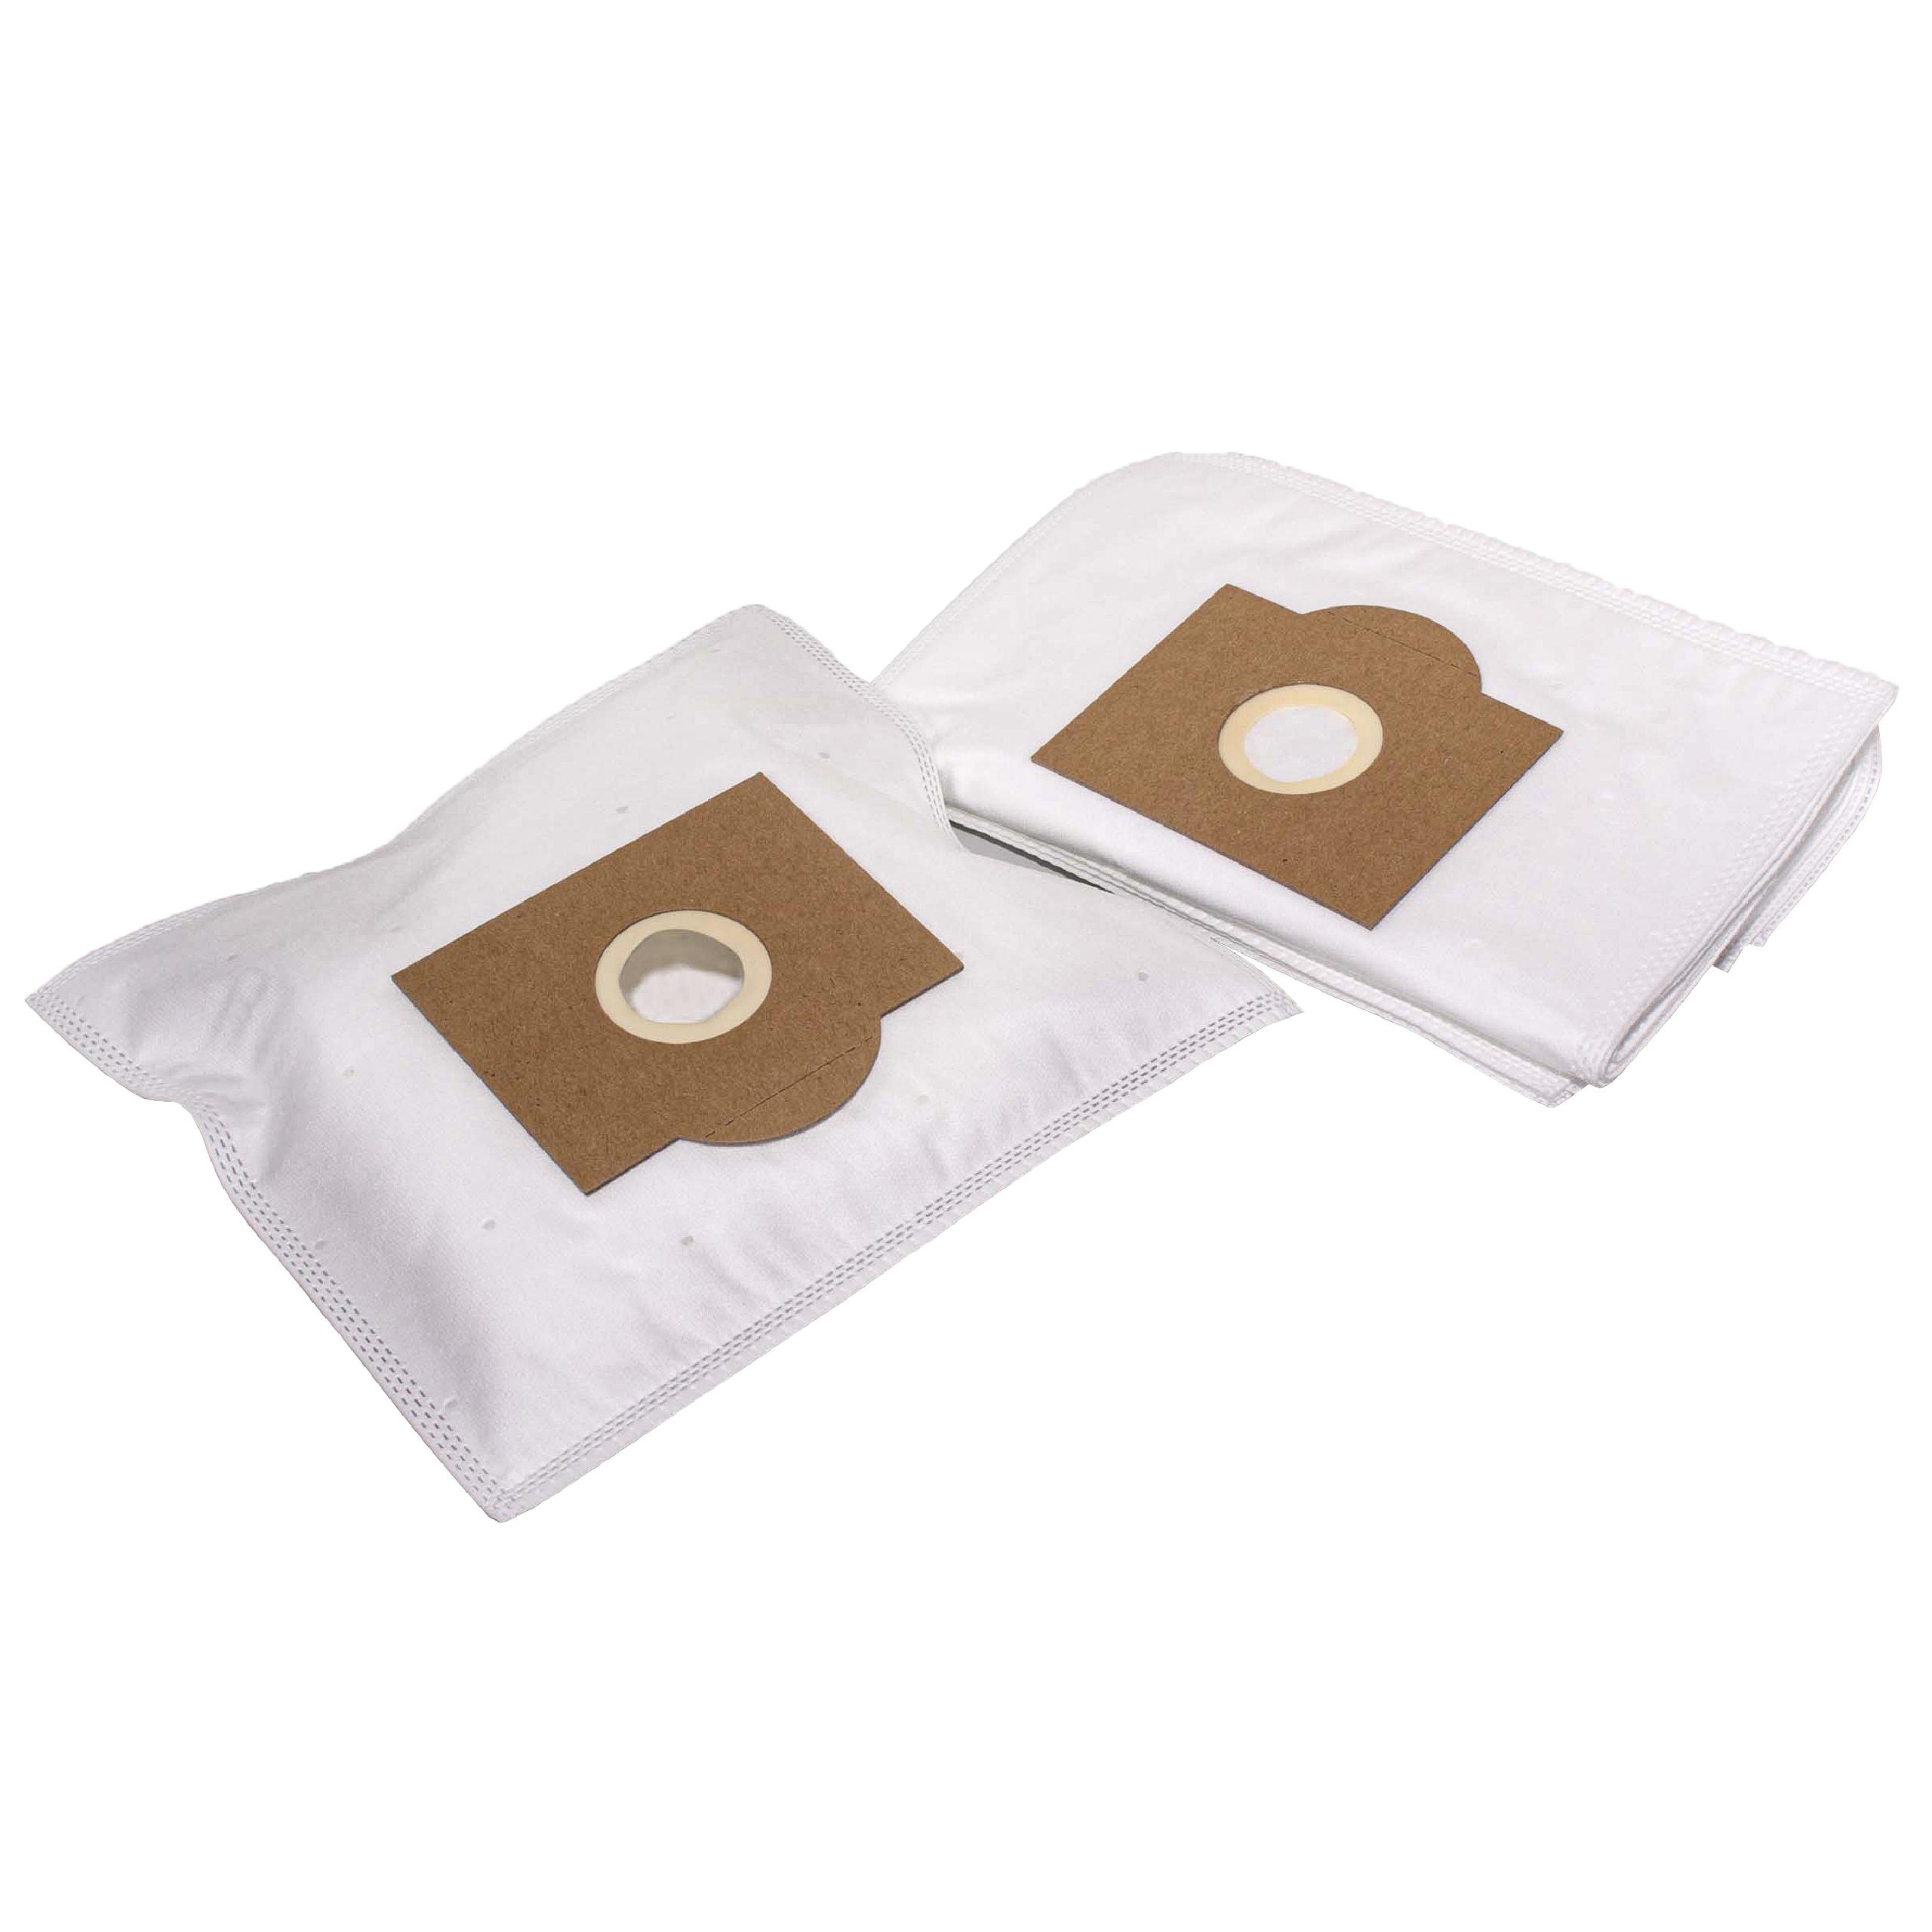 10x Vacuum Cleaner Bag replaces Menalux T035 for Compact - microfleece